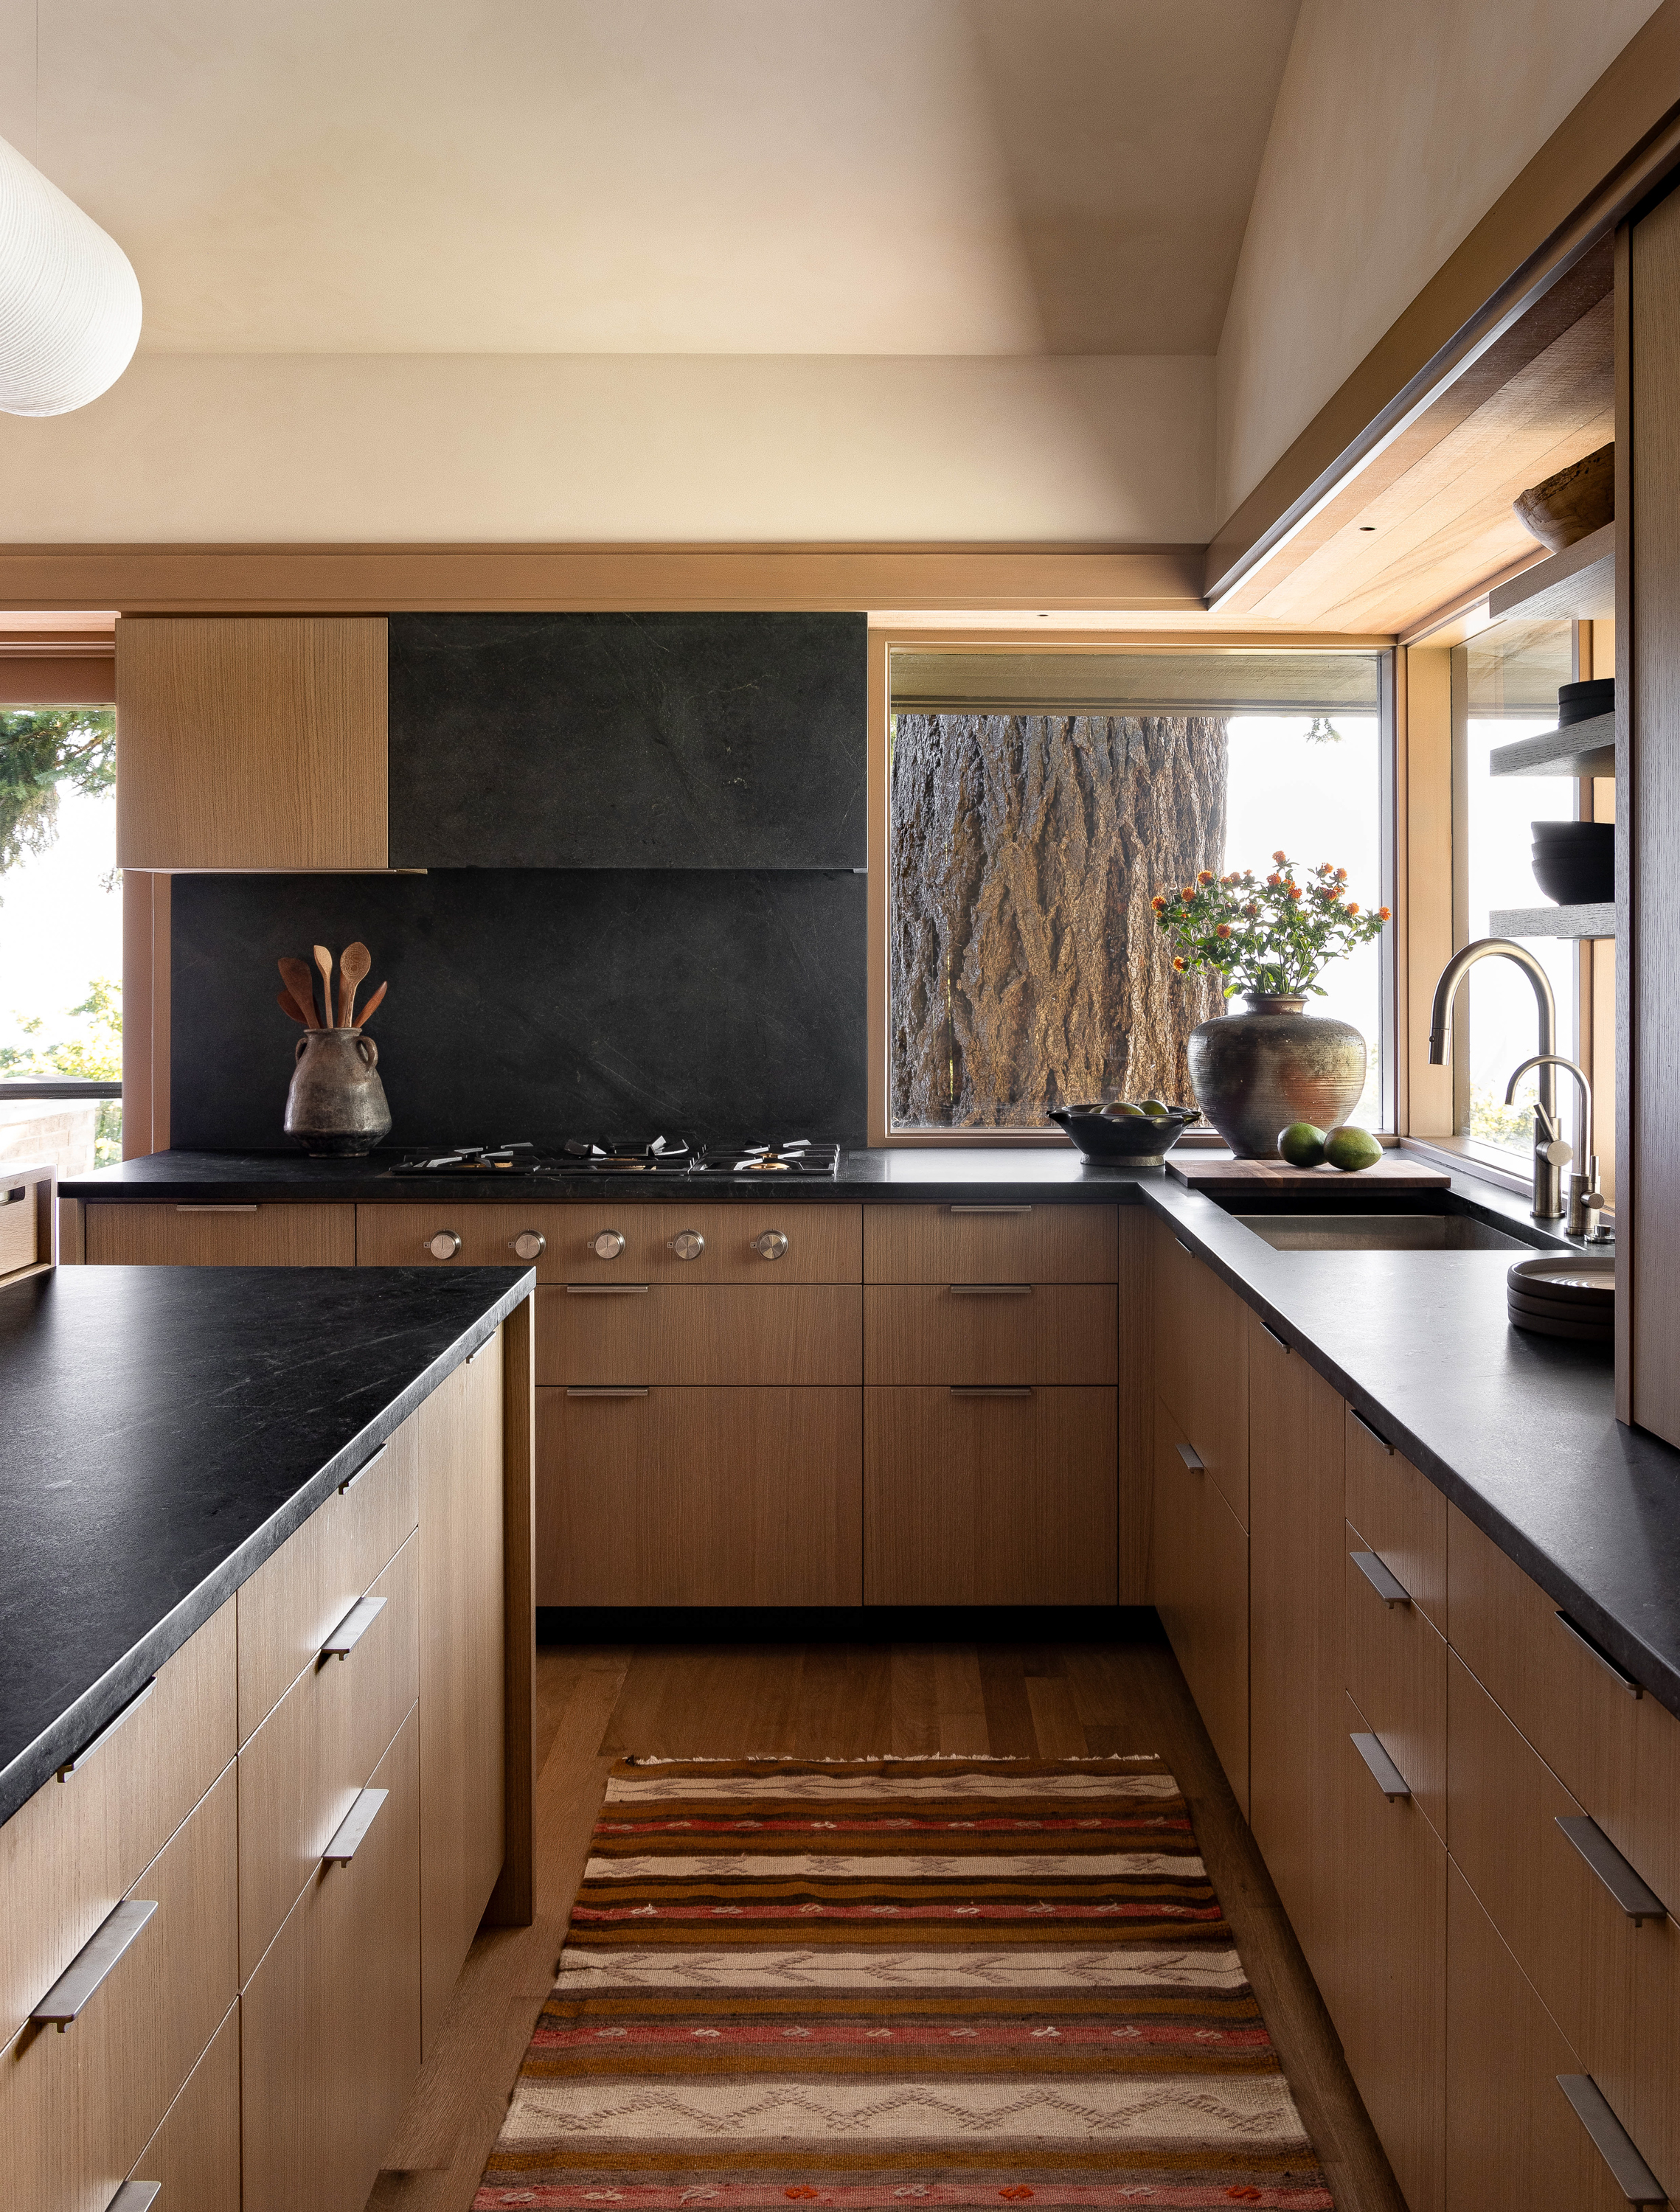 Kitchen renovation maximizes functionality and socializing. HenryBuilt cabinets, bar seating, and stunning Puget Sound views create a perfect entertaining space.